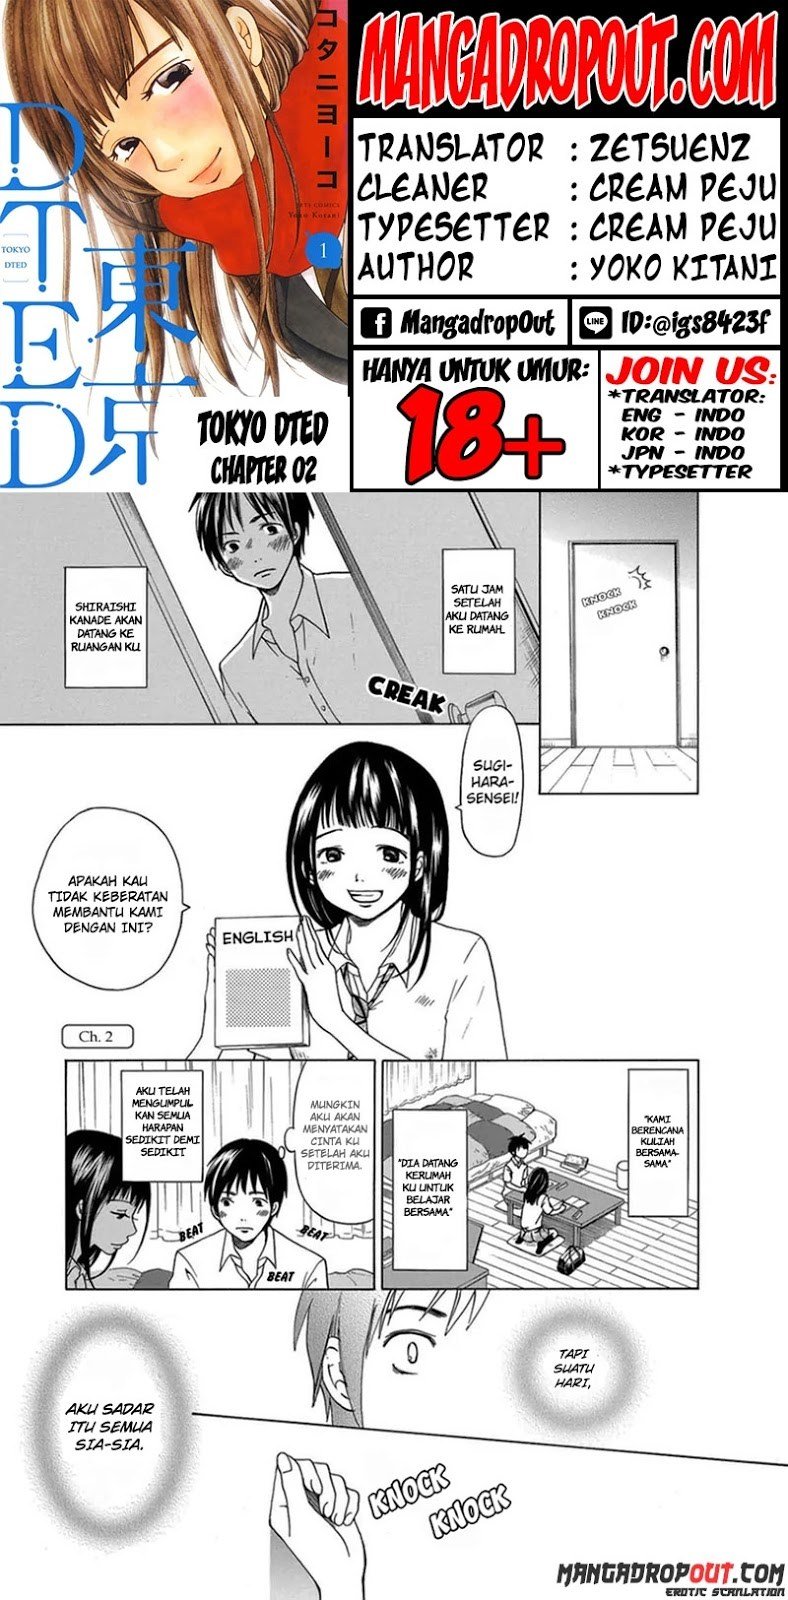 Tokyo DTED Chapter 02